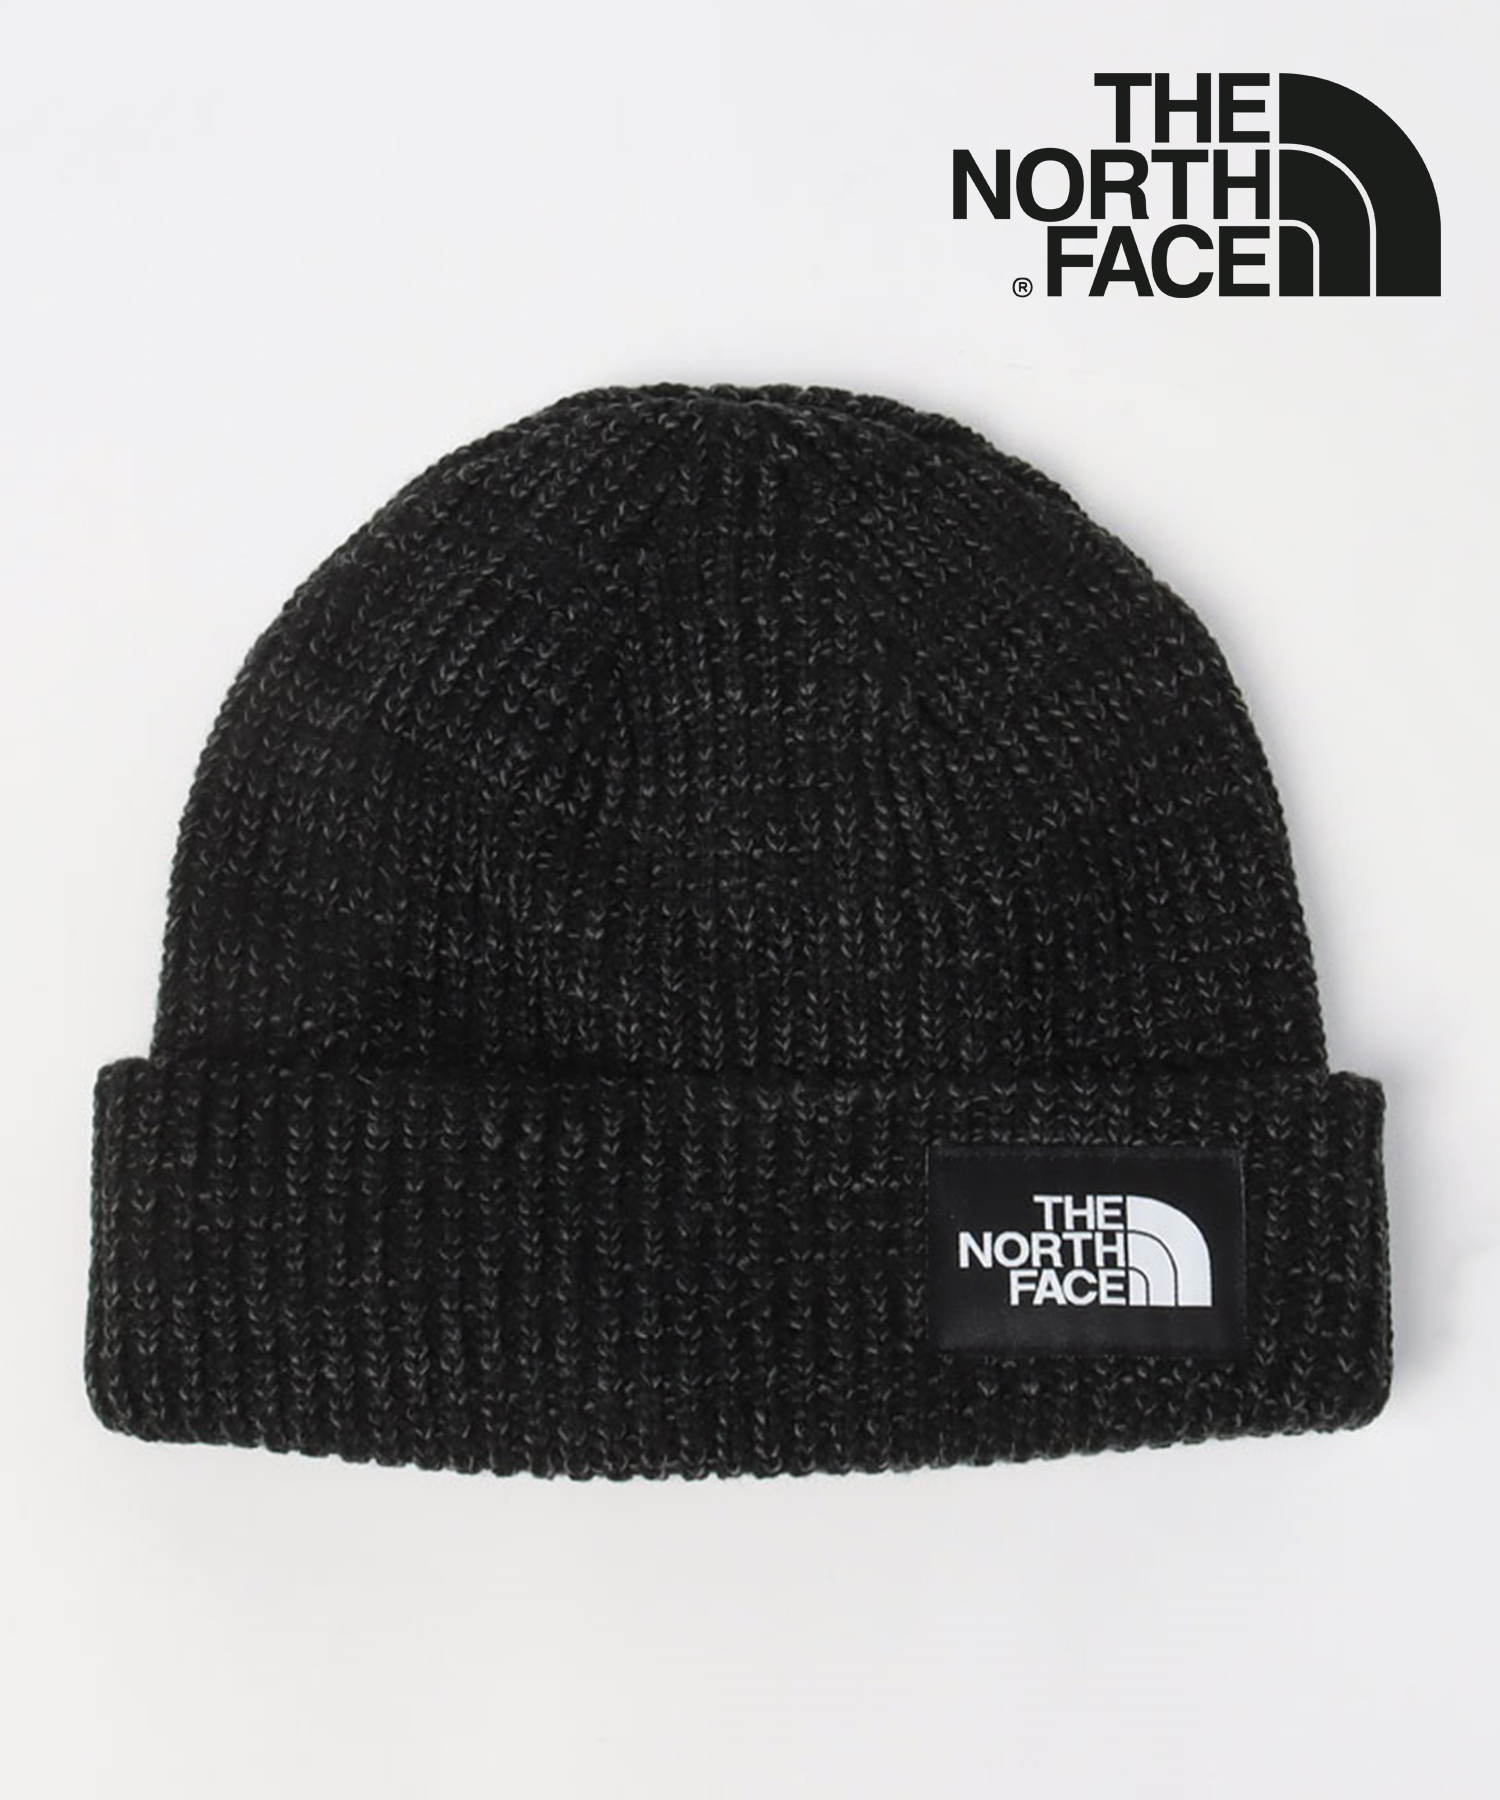 THE NORTH FACE/【THE NORTH FACE / ザ・ノースフェイス】 SALTY DOG BEANIE ニット帽 ビーニー 3FJW ギフト プレゼント 贈り物/505108461